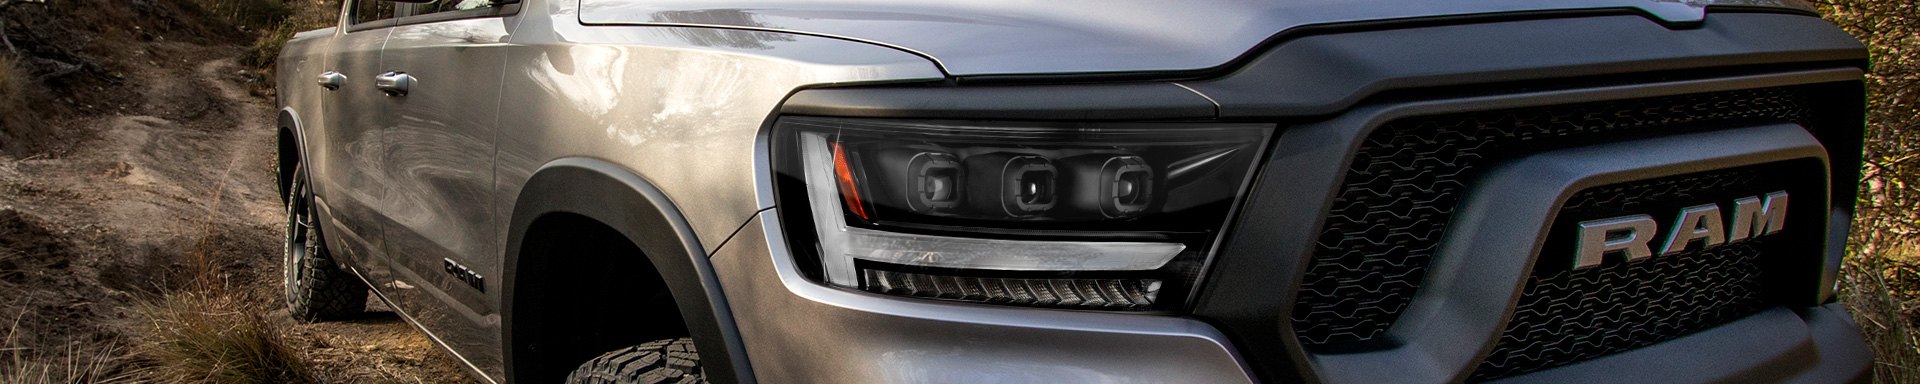 New Projector Headlights by Anzo For 2019-2021 Ram 1500 Are Already Here!